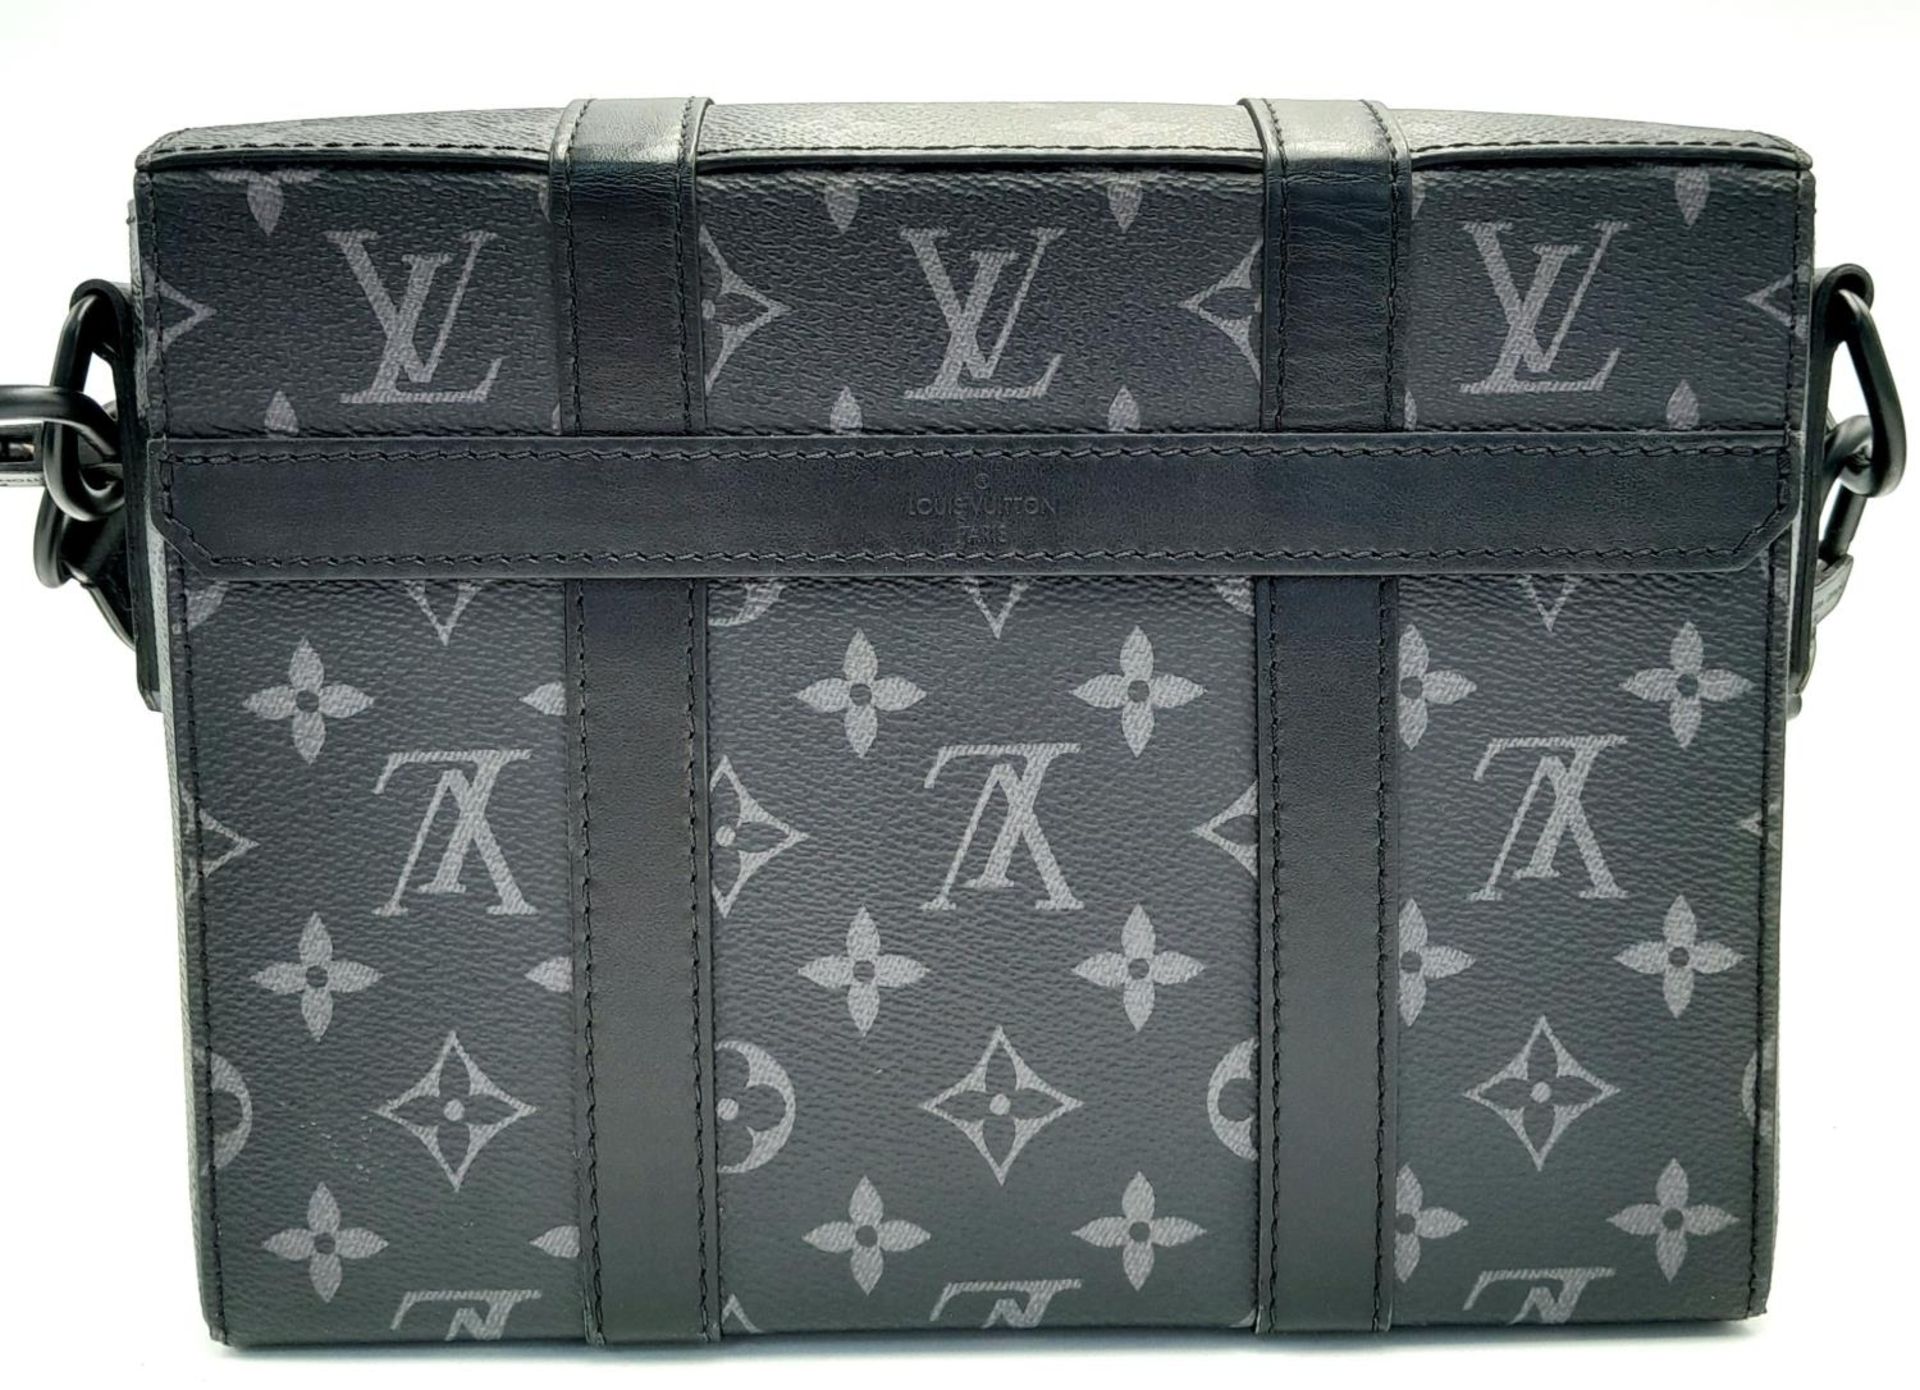 A Louis Vuitton Black Eclipse Trunk Messenger Bag. Monogramed canvas exterior with black-toned - Image 4 of 10